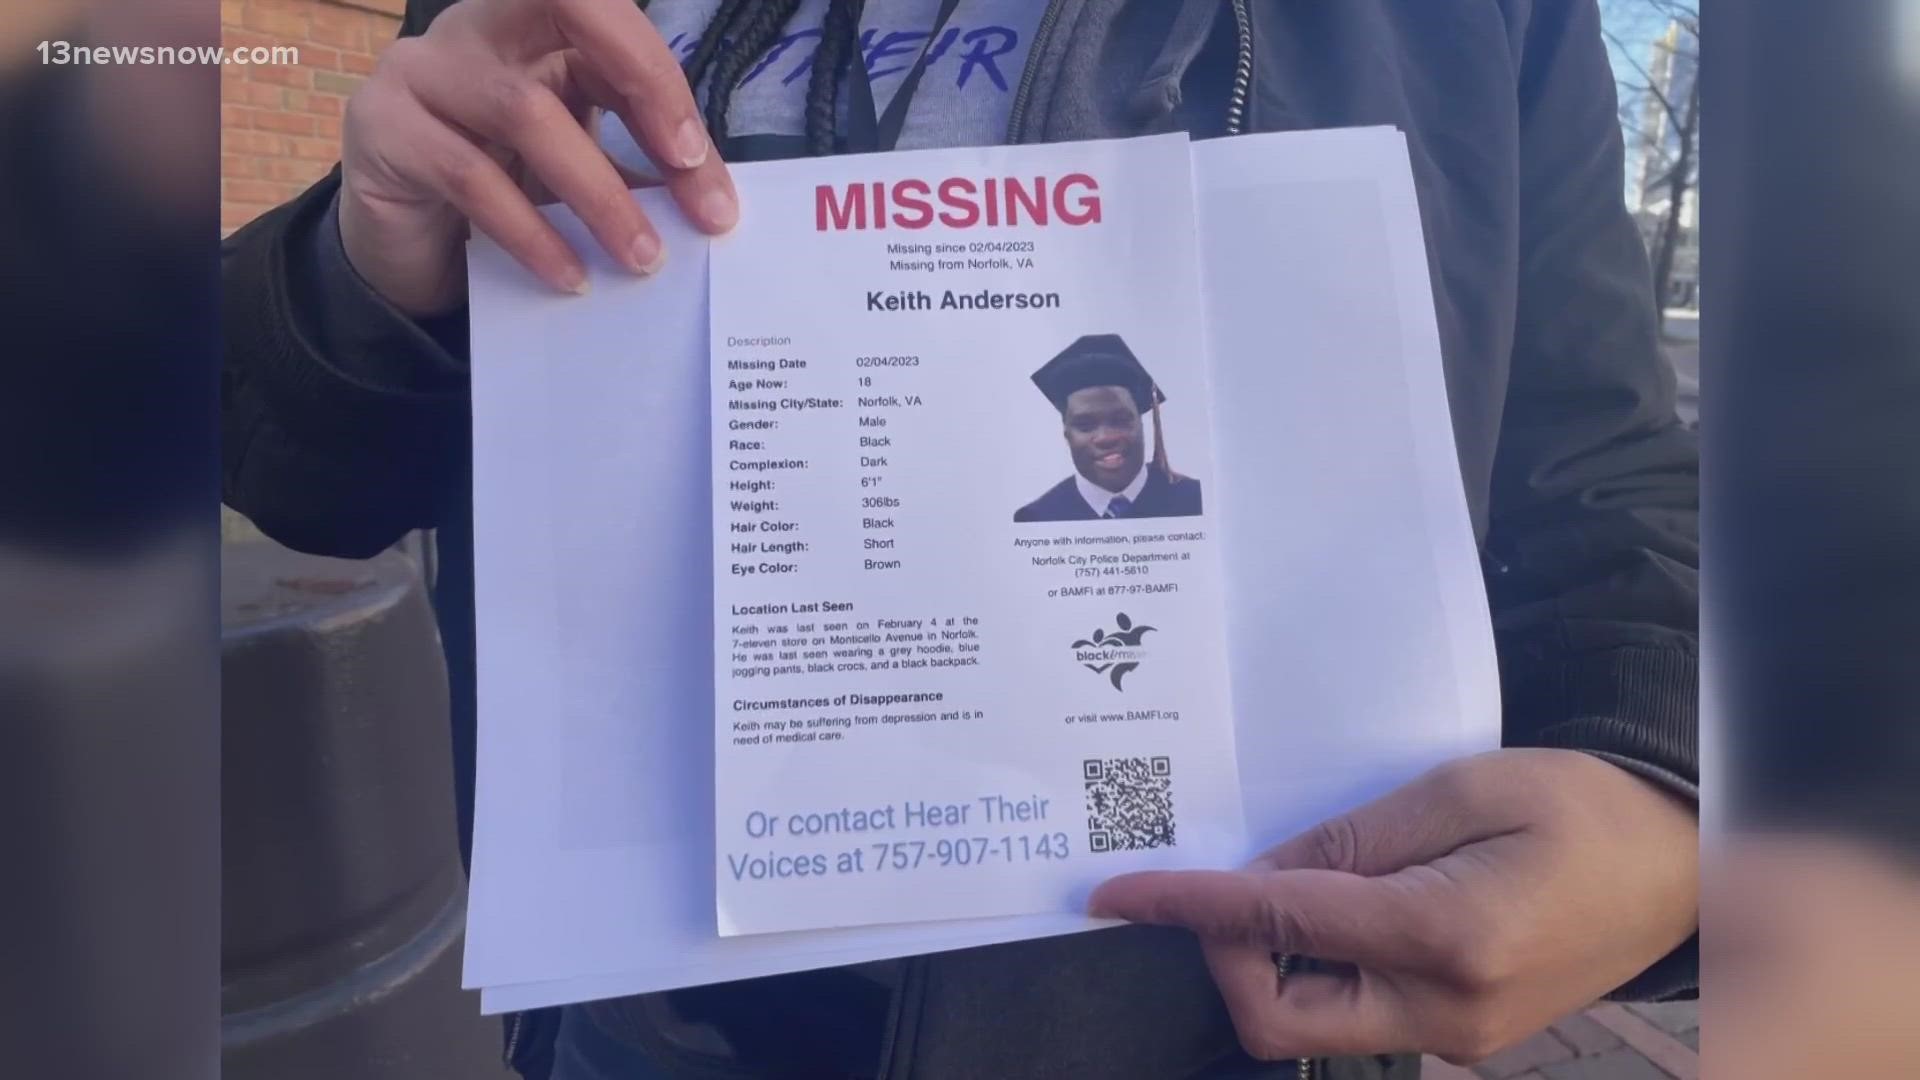 The group 'Hear Their Voices' led search efforts for 18-year-old Keith Anderson, who hasn't been seen in two weeks.